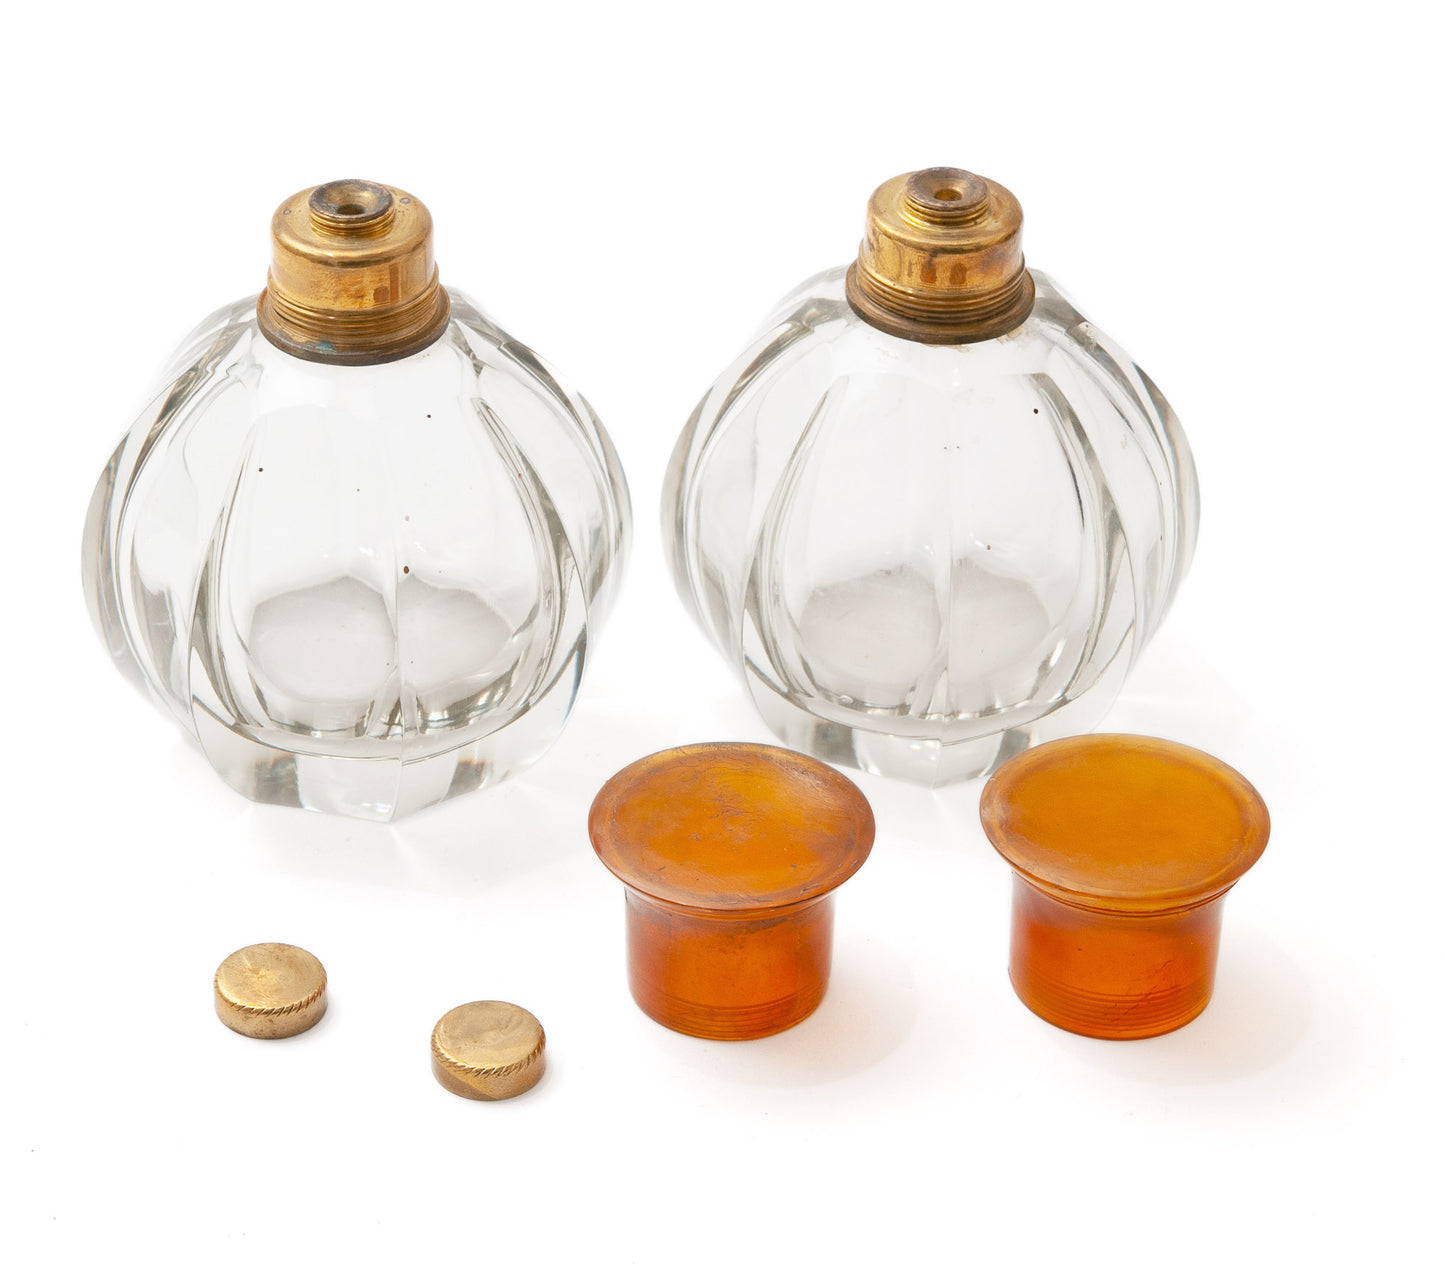 Pair of Antique Art Deco Heavy Cut Glass & Brass Mounted Scent Perfume Bottles (code 1554)